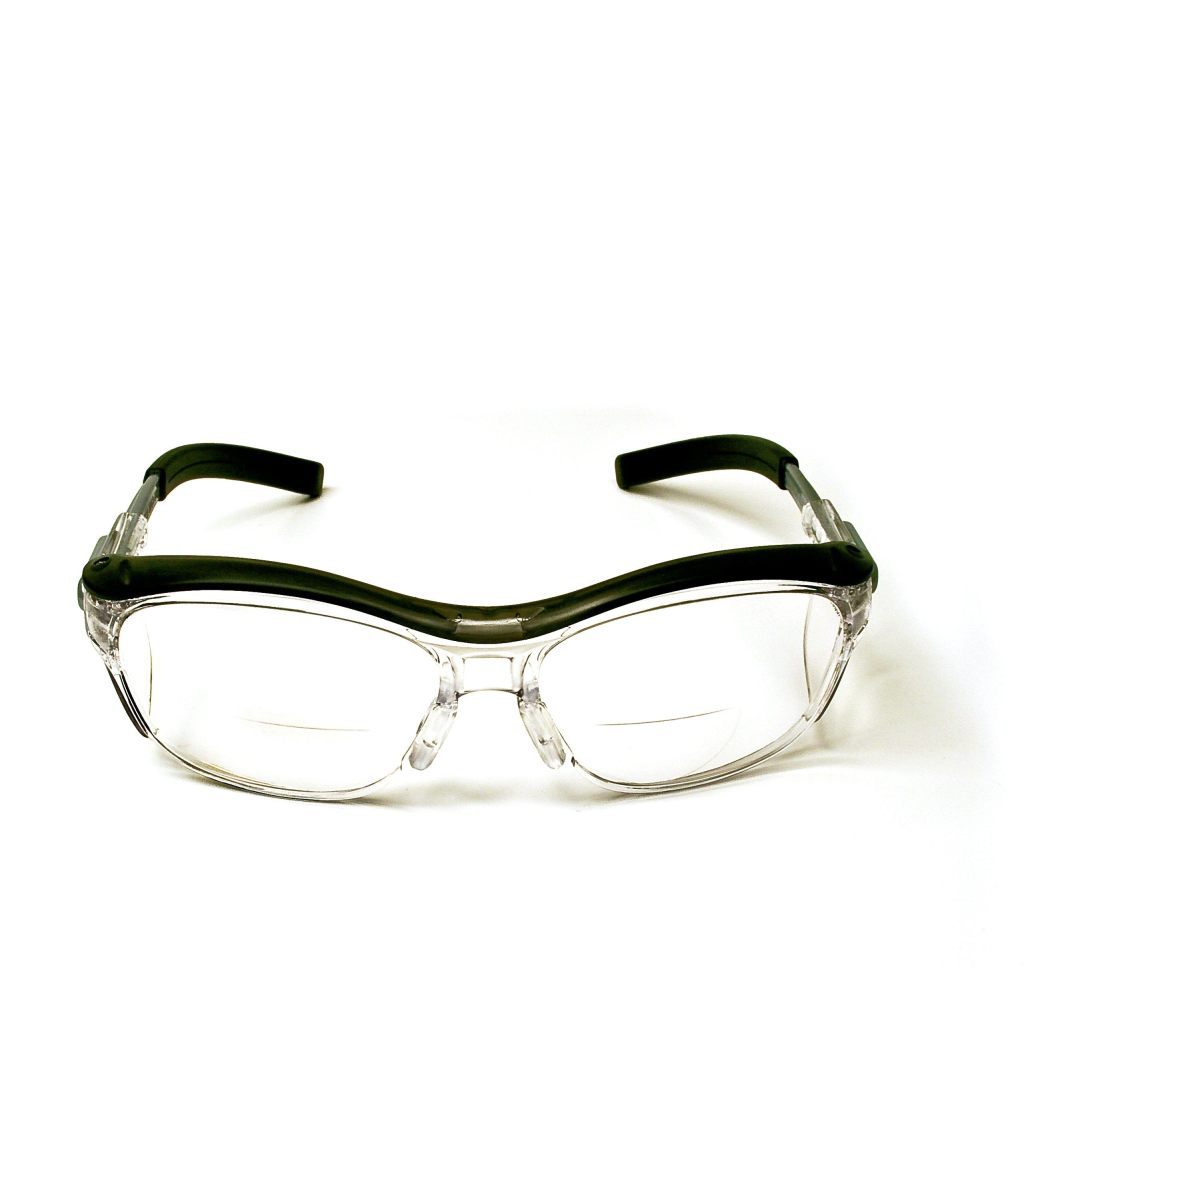 3M™ Nuvo™ Reader Protective Eyewear 11434-00000-20 Clear Lens, Gray Frame, +1.5 Diopter (Availability restrictions apply.)